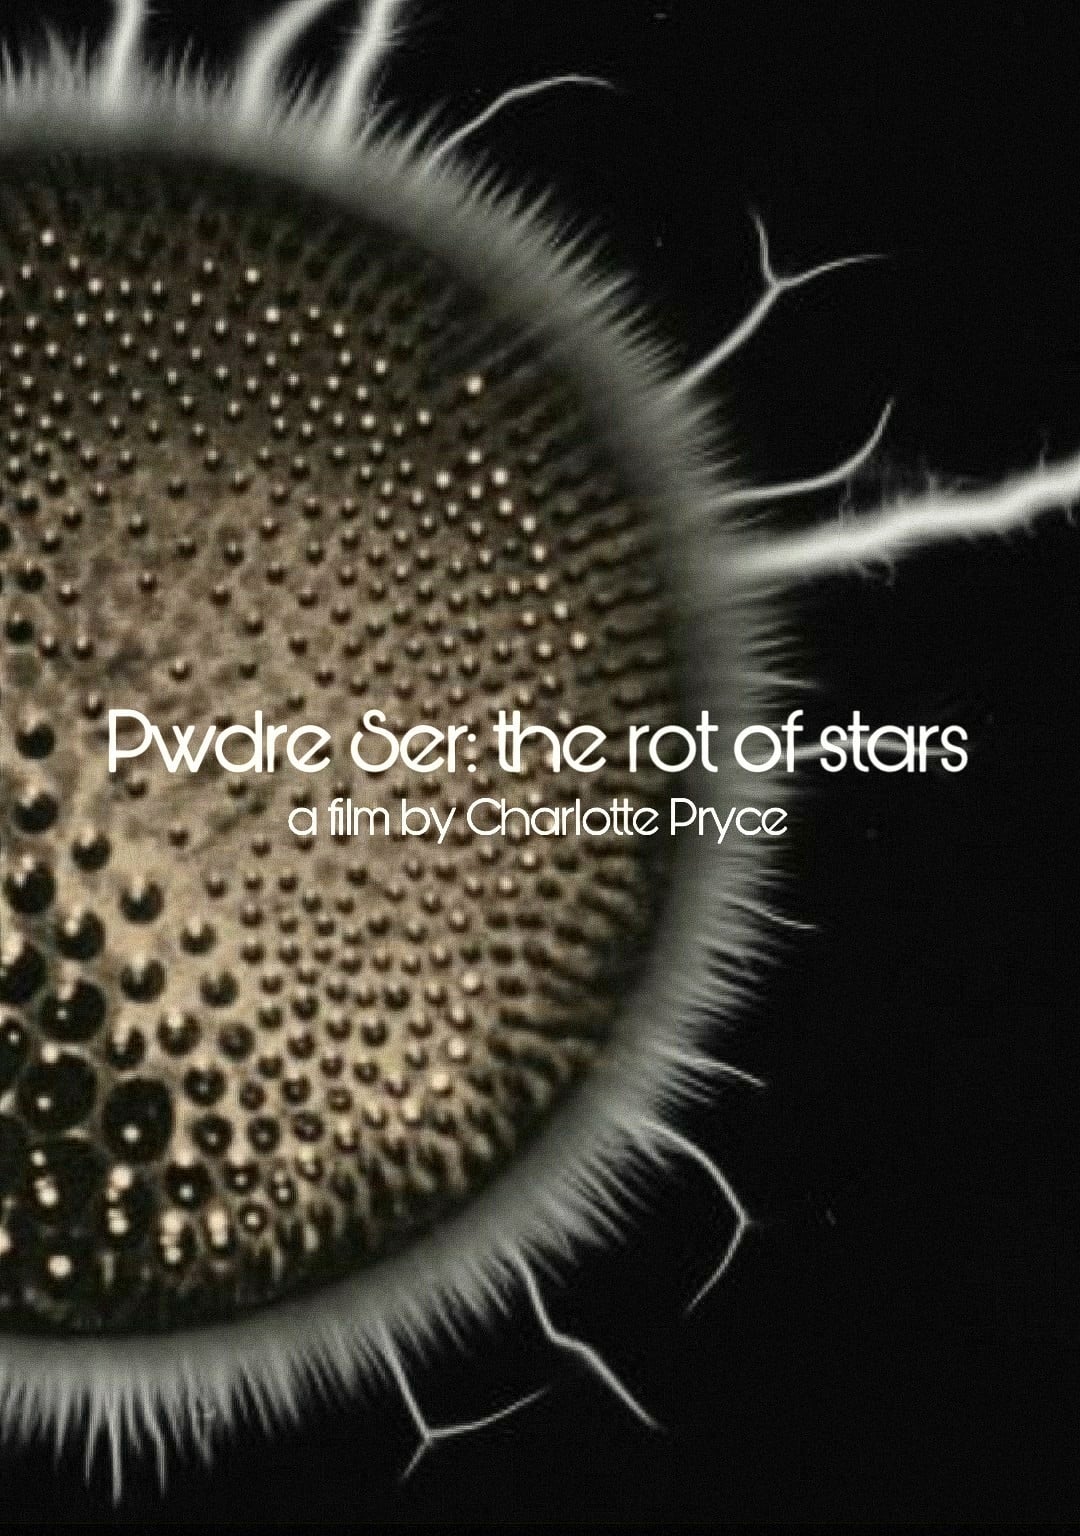 Pwdre Ser: the rot of stars